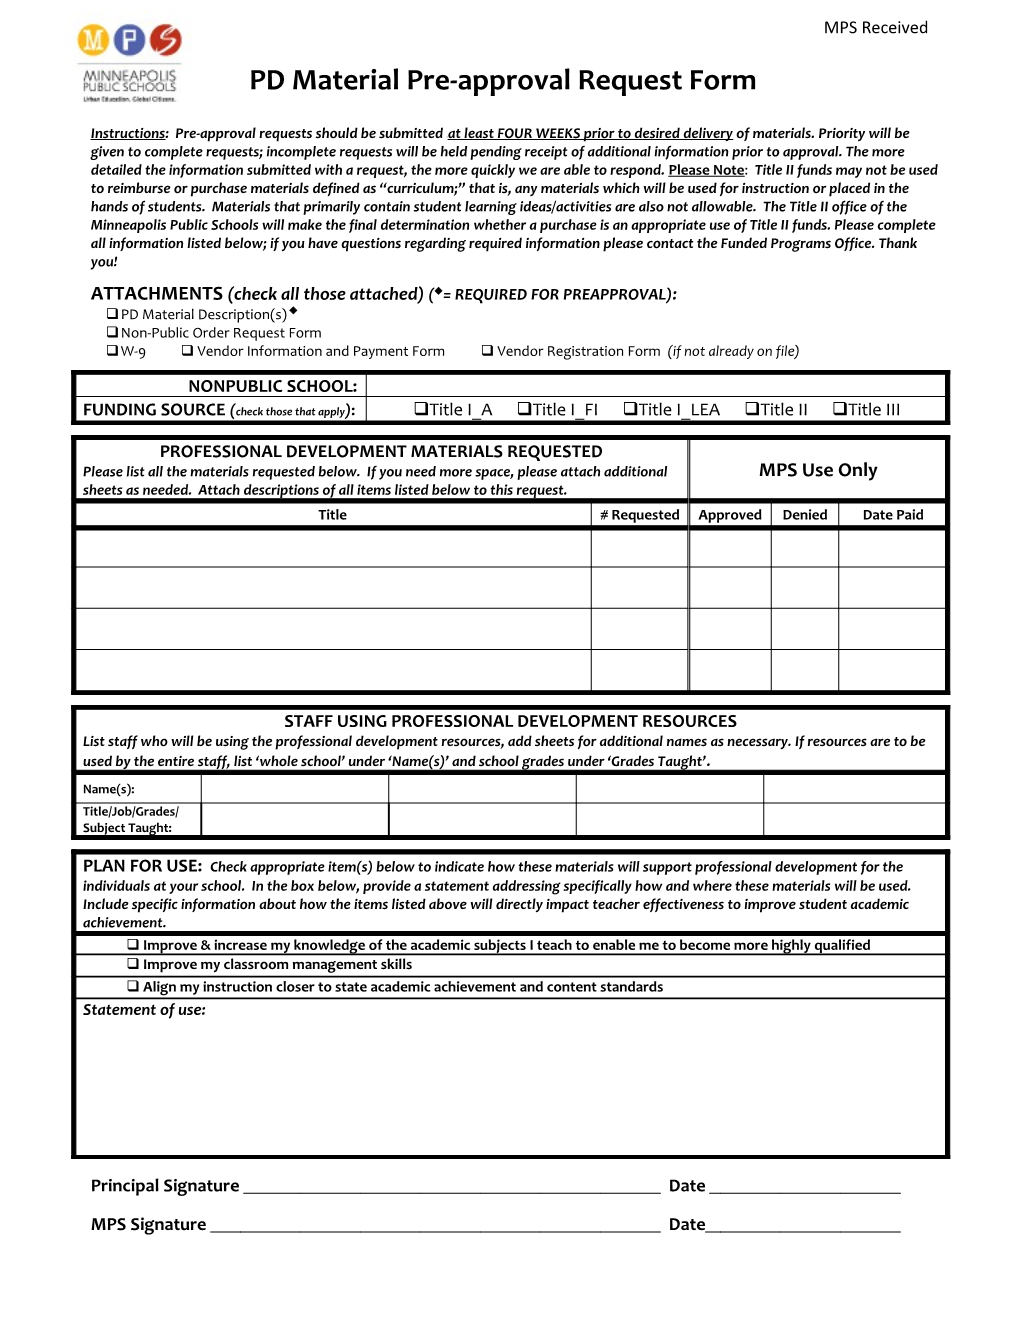 PD Material Pre-Approval Request Form